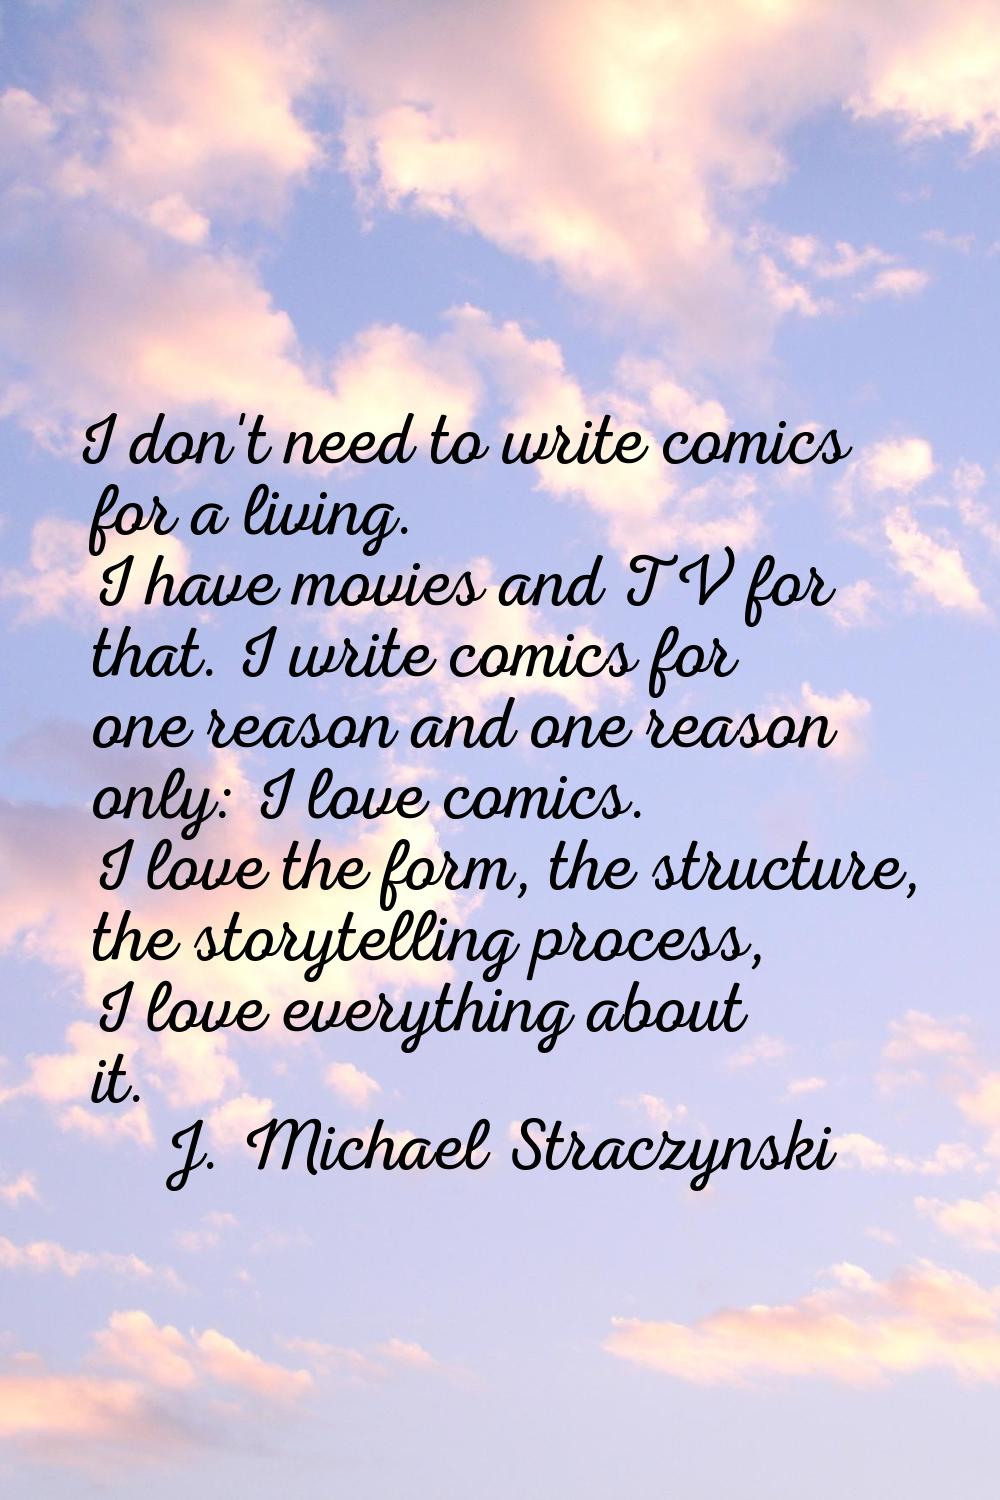 I don't need to write comics for a living. I have movies and TV for that. I write comics for one re